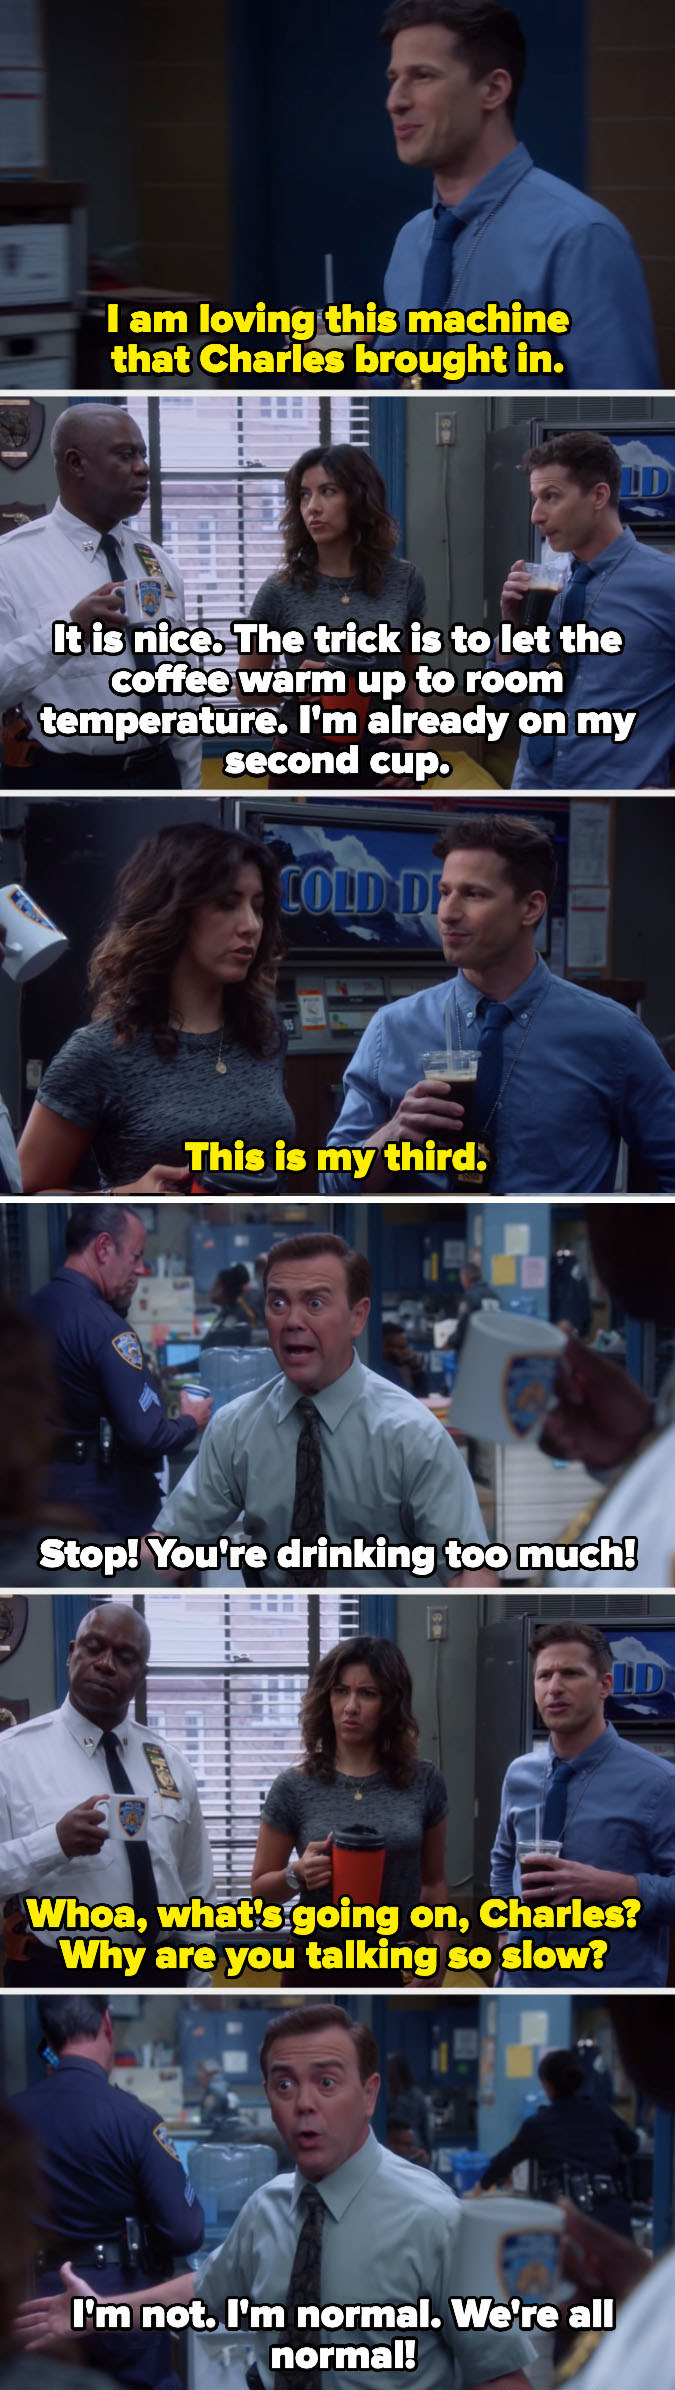 Boyle trying to make Jake, Rosa, and Holt slow down and revealing that everyone is normal so they are the ones moving fast